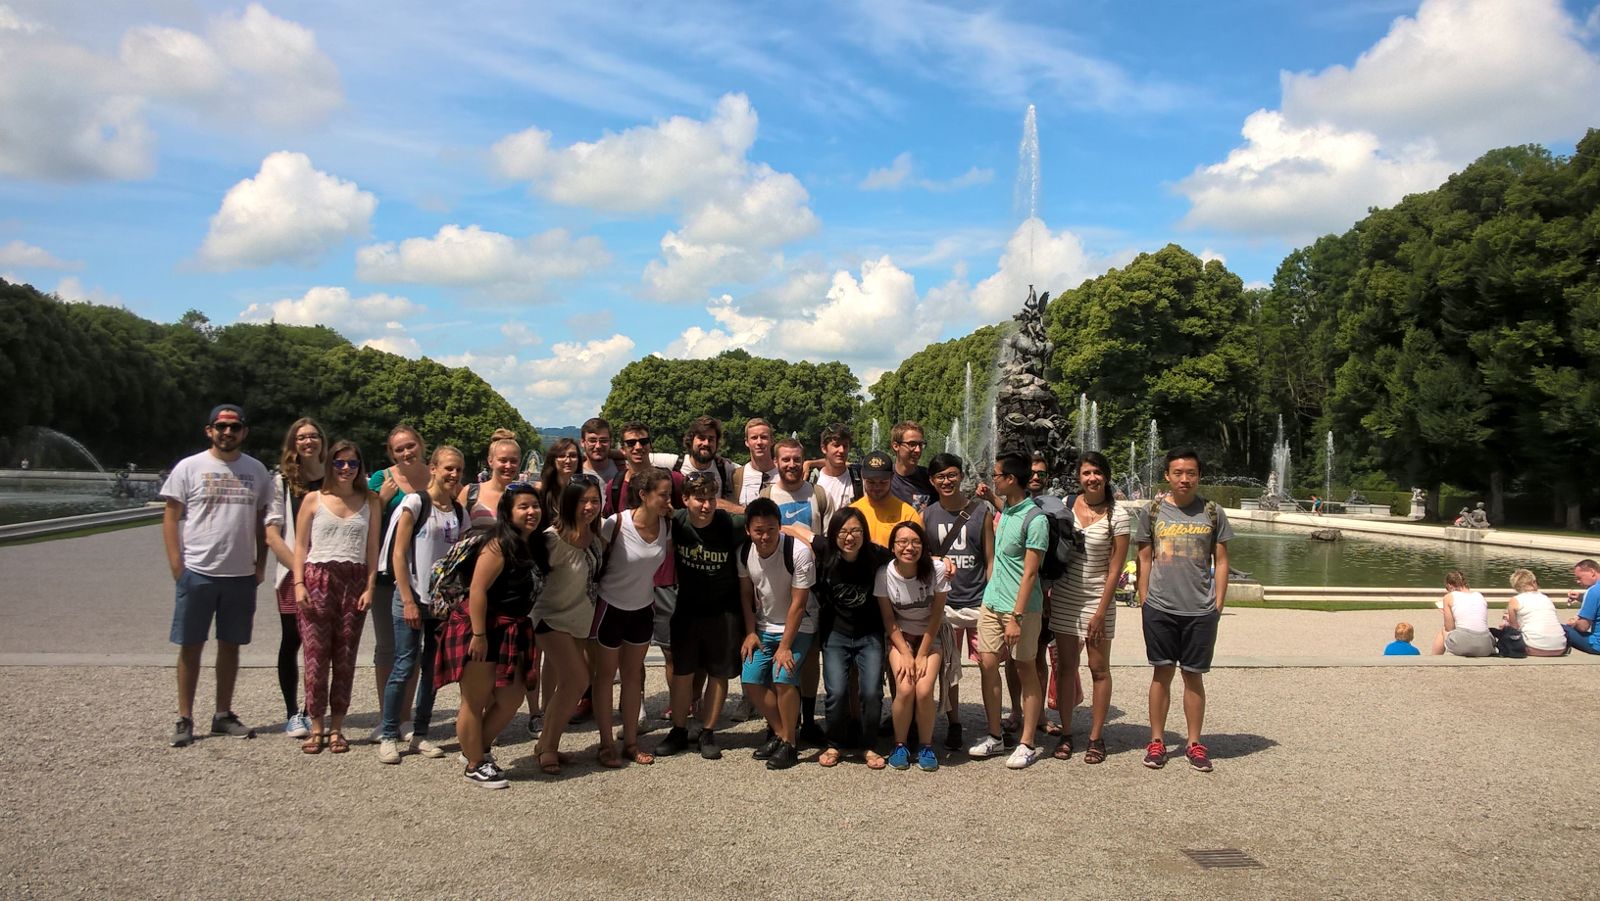 Students in front of Herrenchiemsee Palace, overlooking the beautiful trees